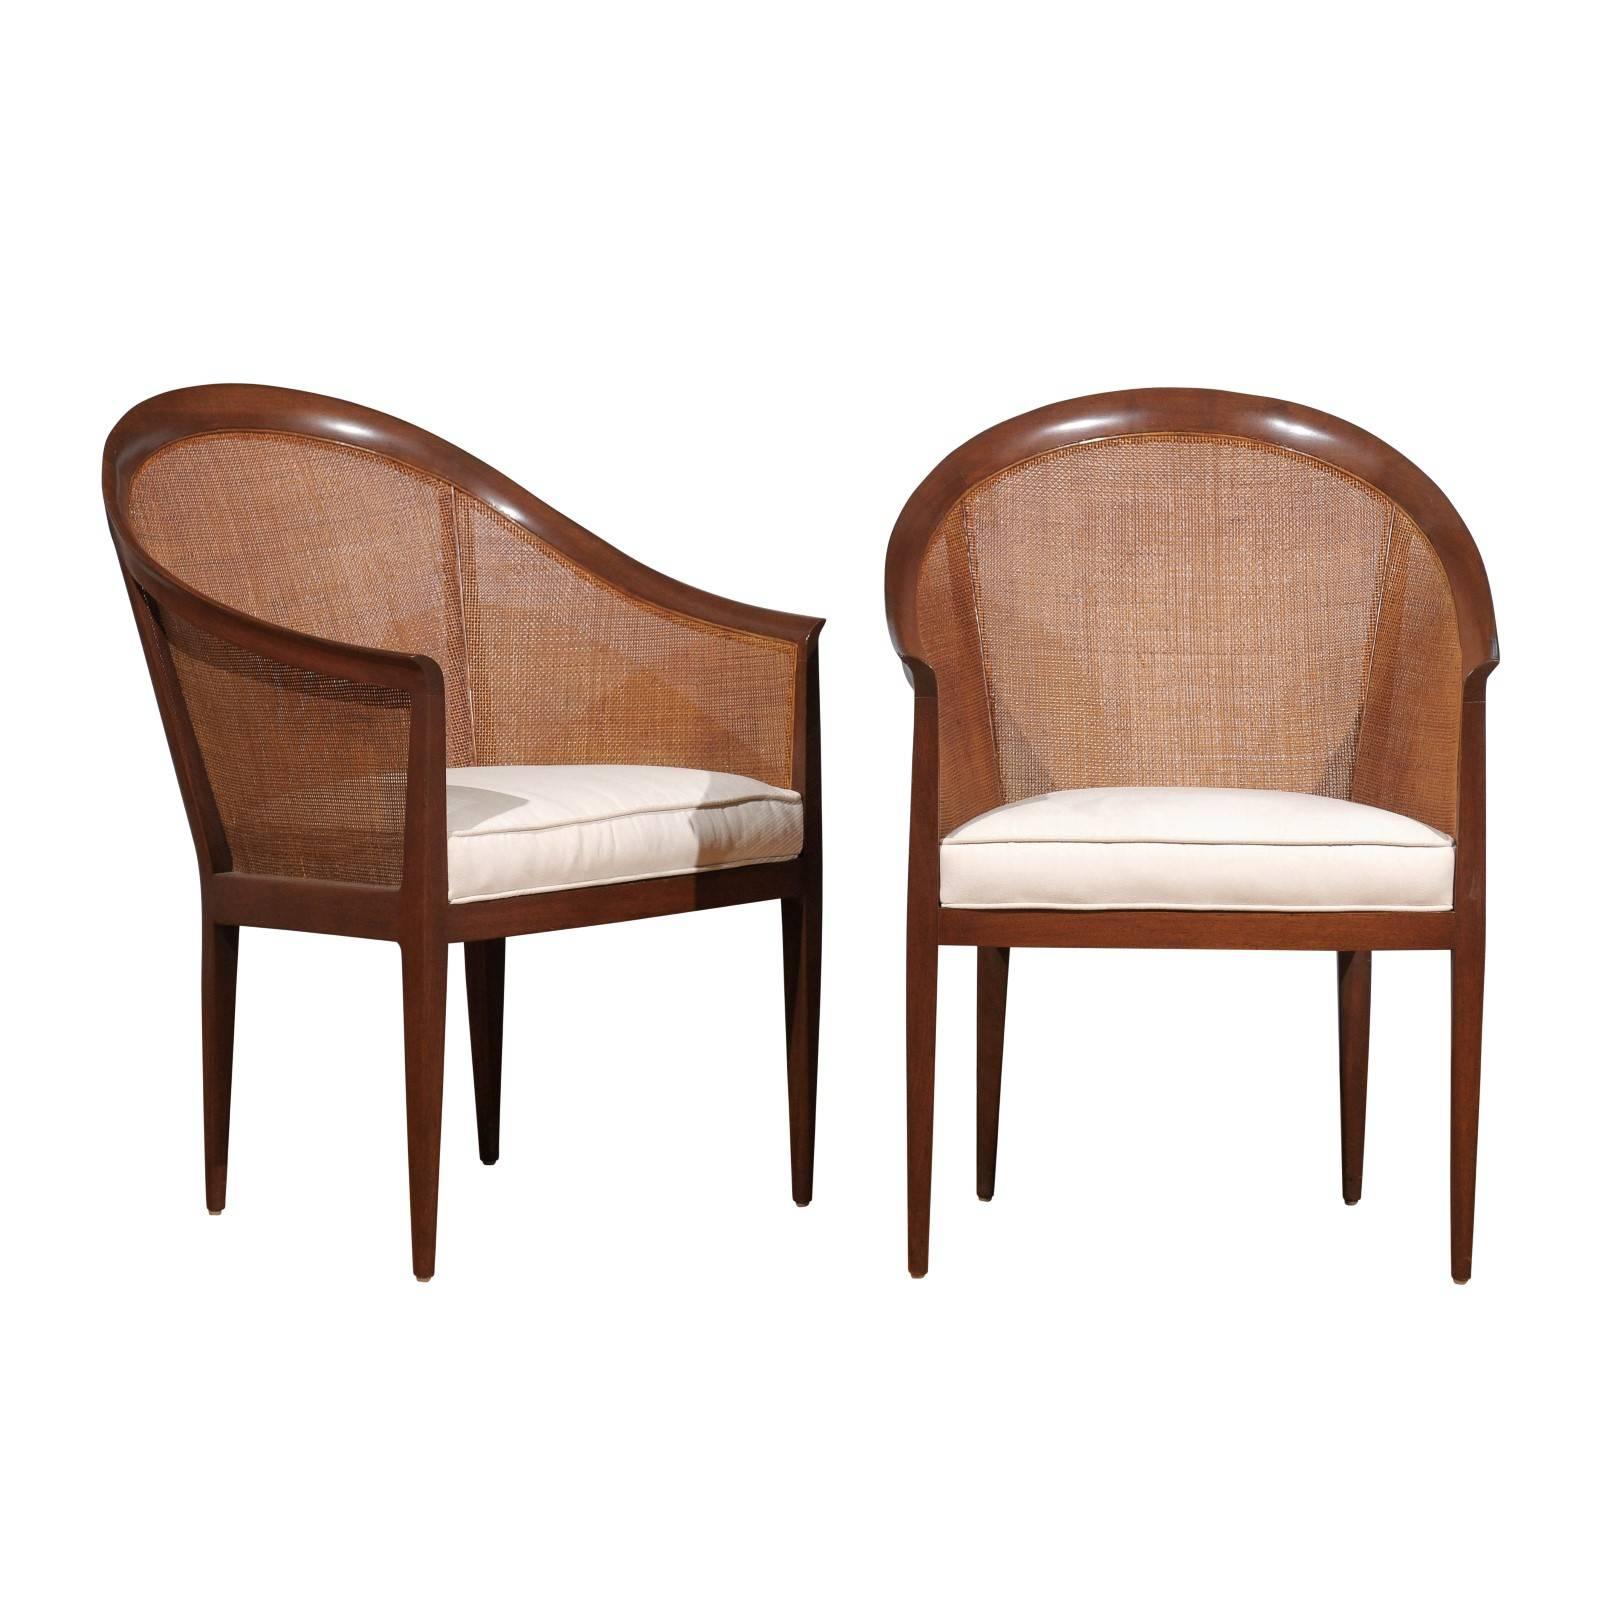 Elegant Restored Pair of Walnut Cane Chairs by Kipp Stewart for Directional